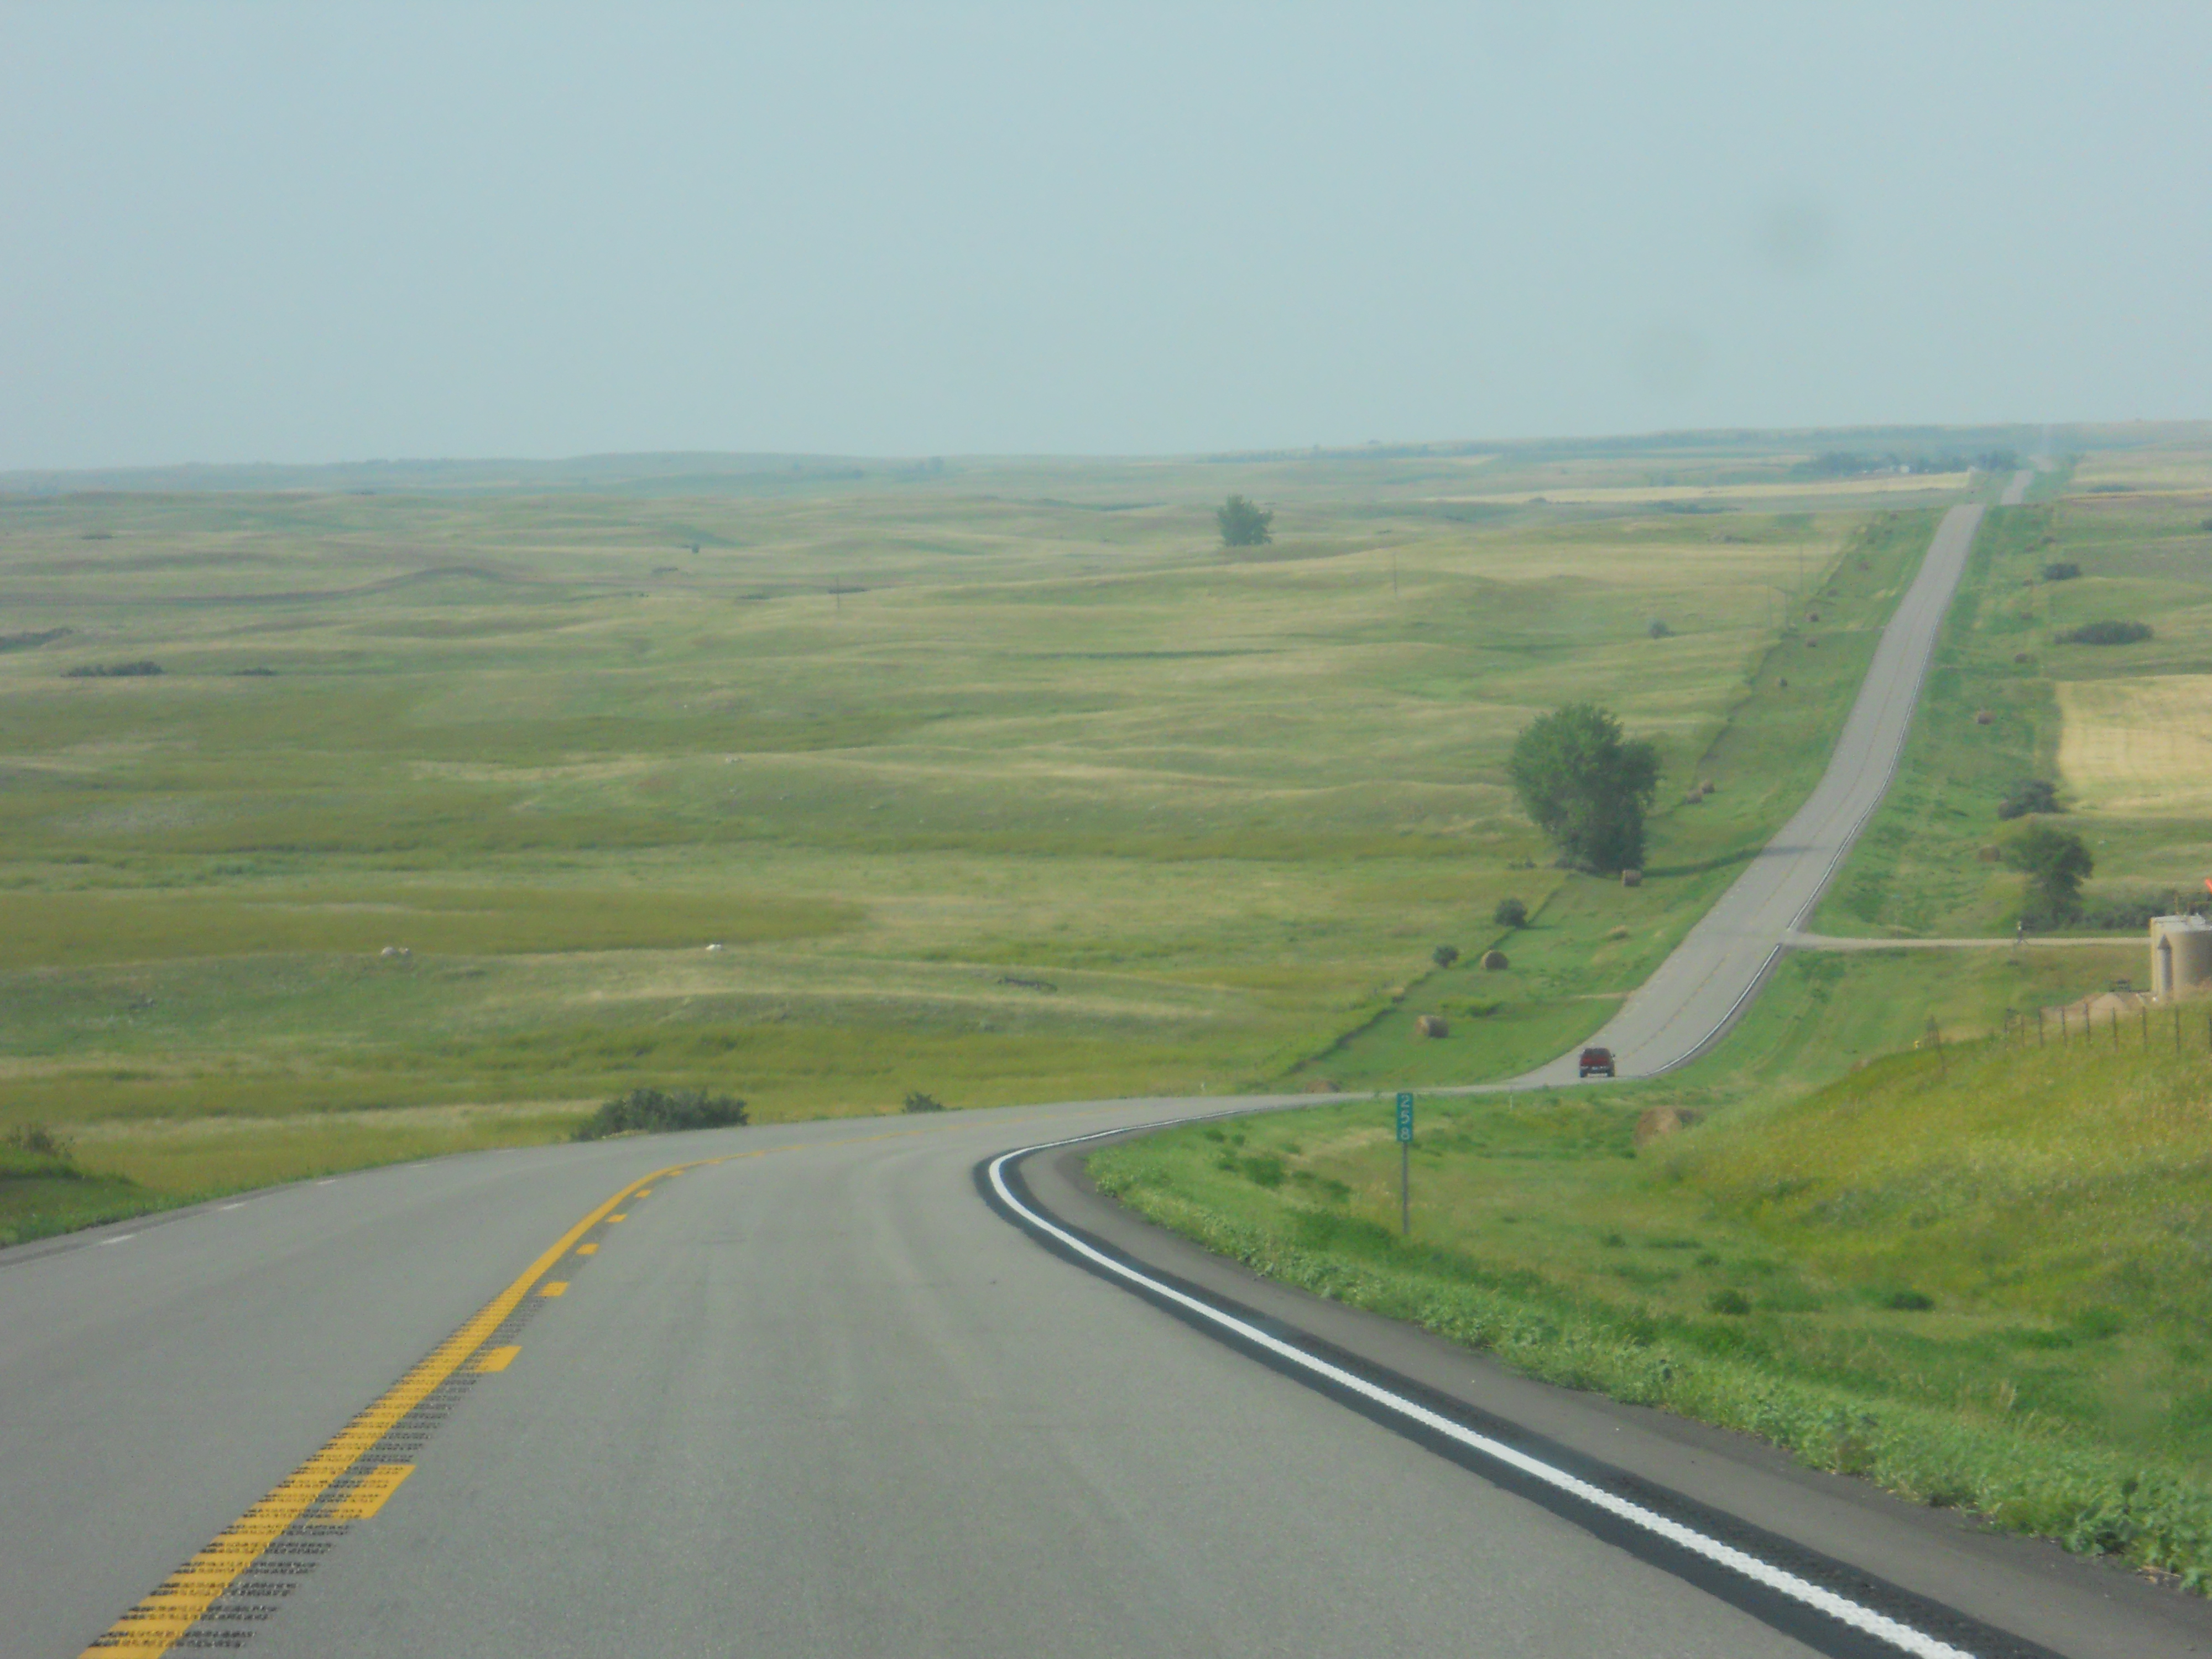 long, winding roadway that disappears into the distance